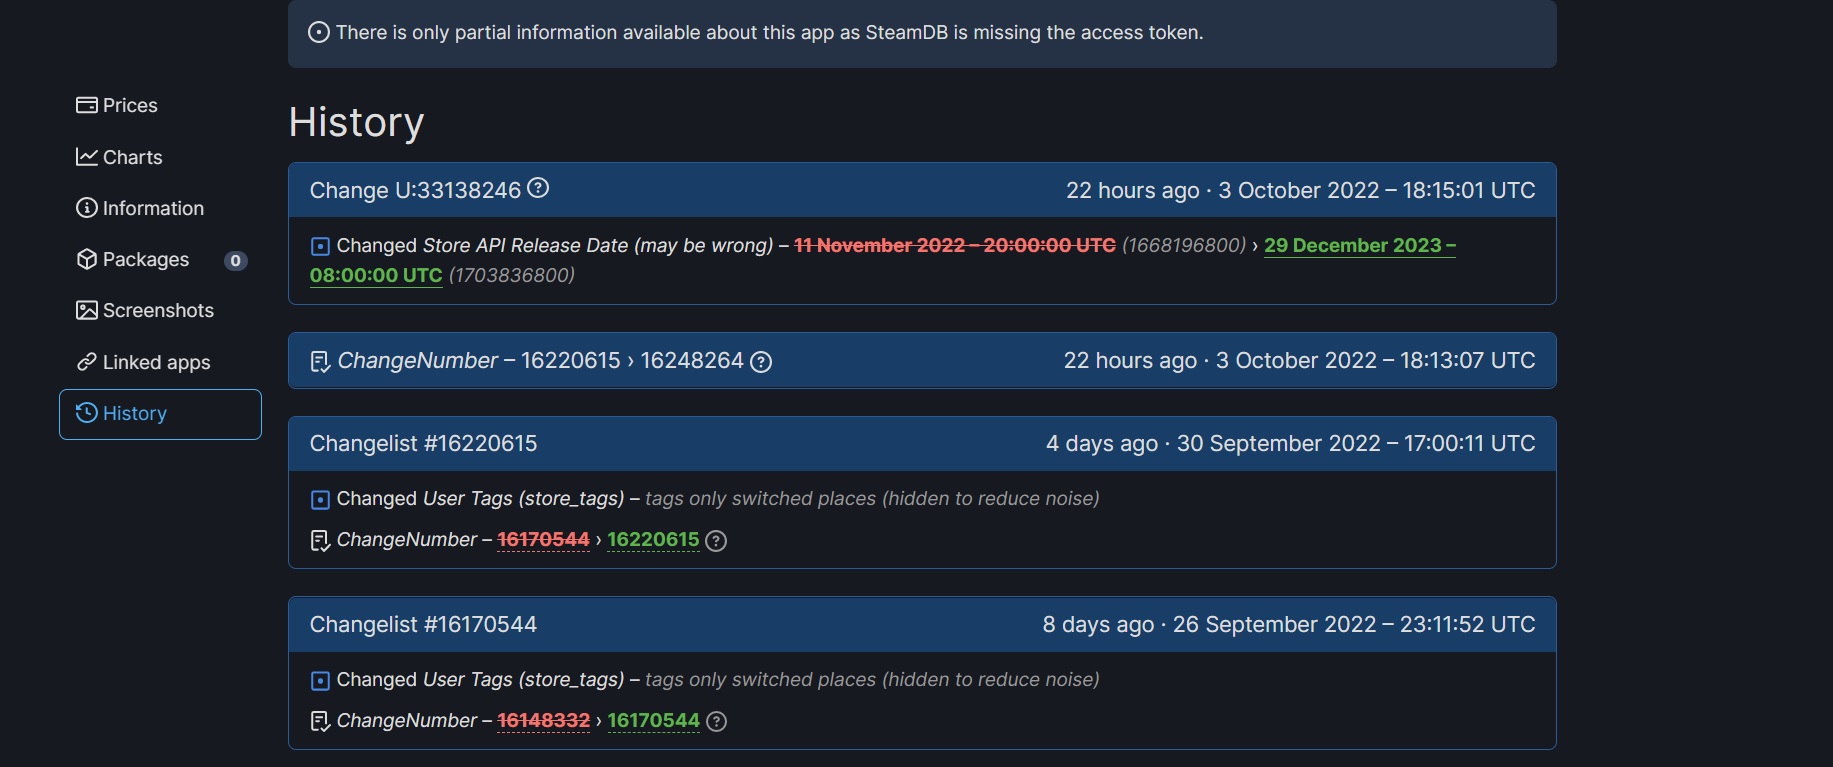 Starfield release date updated on Steam fuelling Bethesda RPG theories: The Starfield release date updated on Steam DB